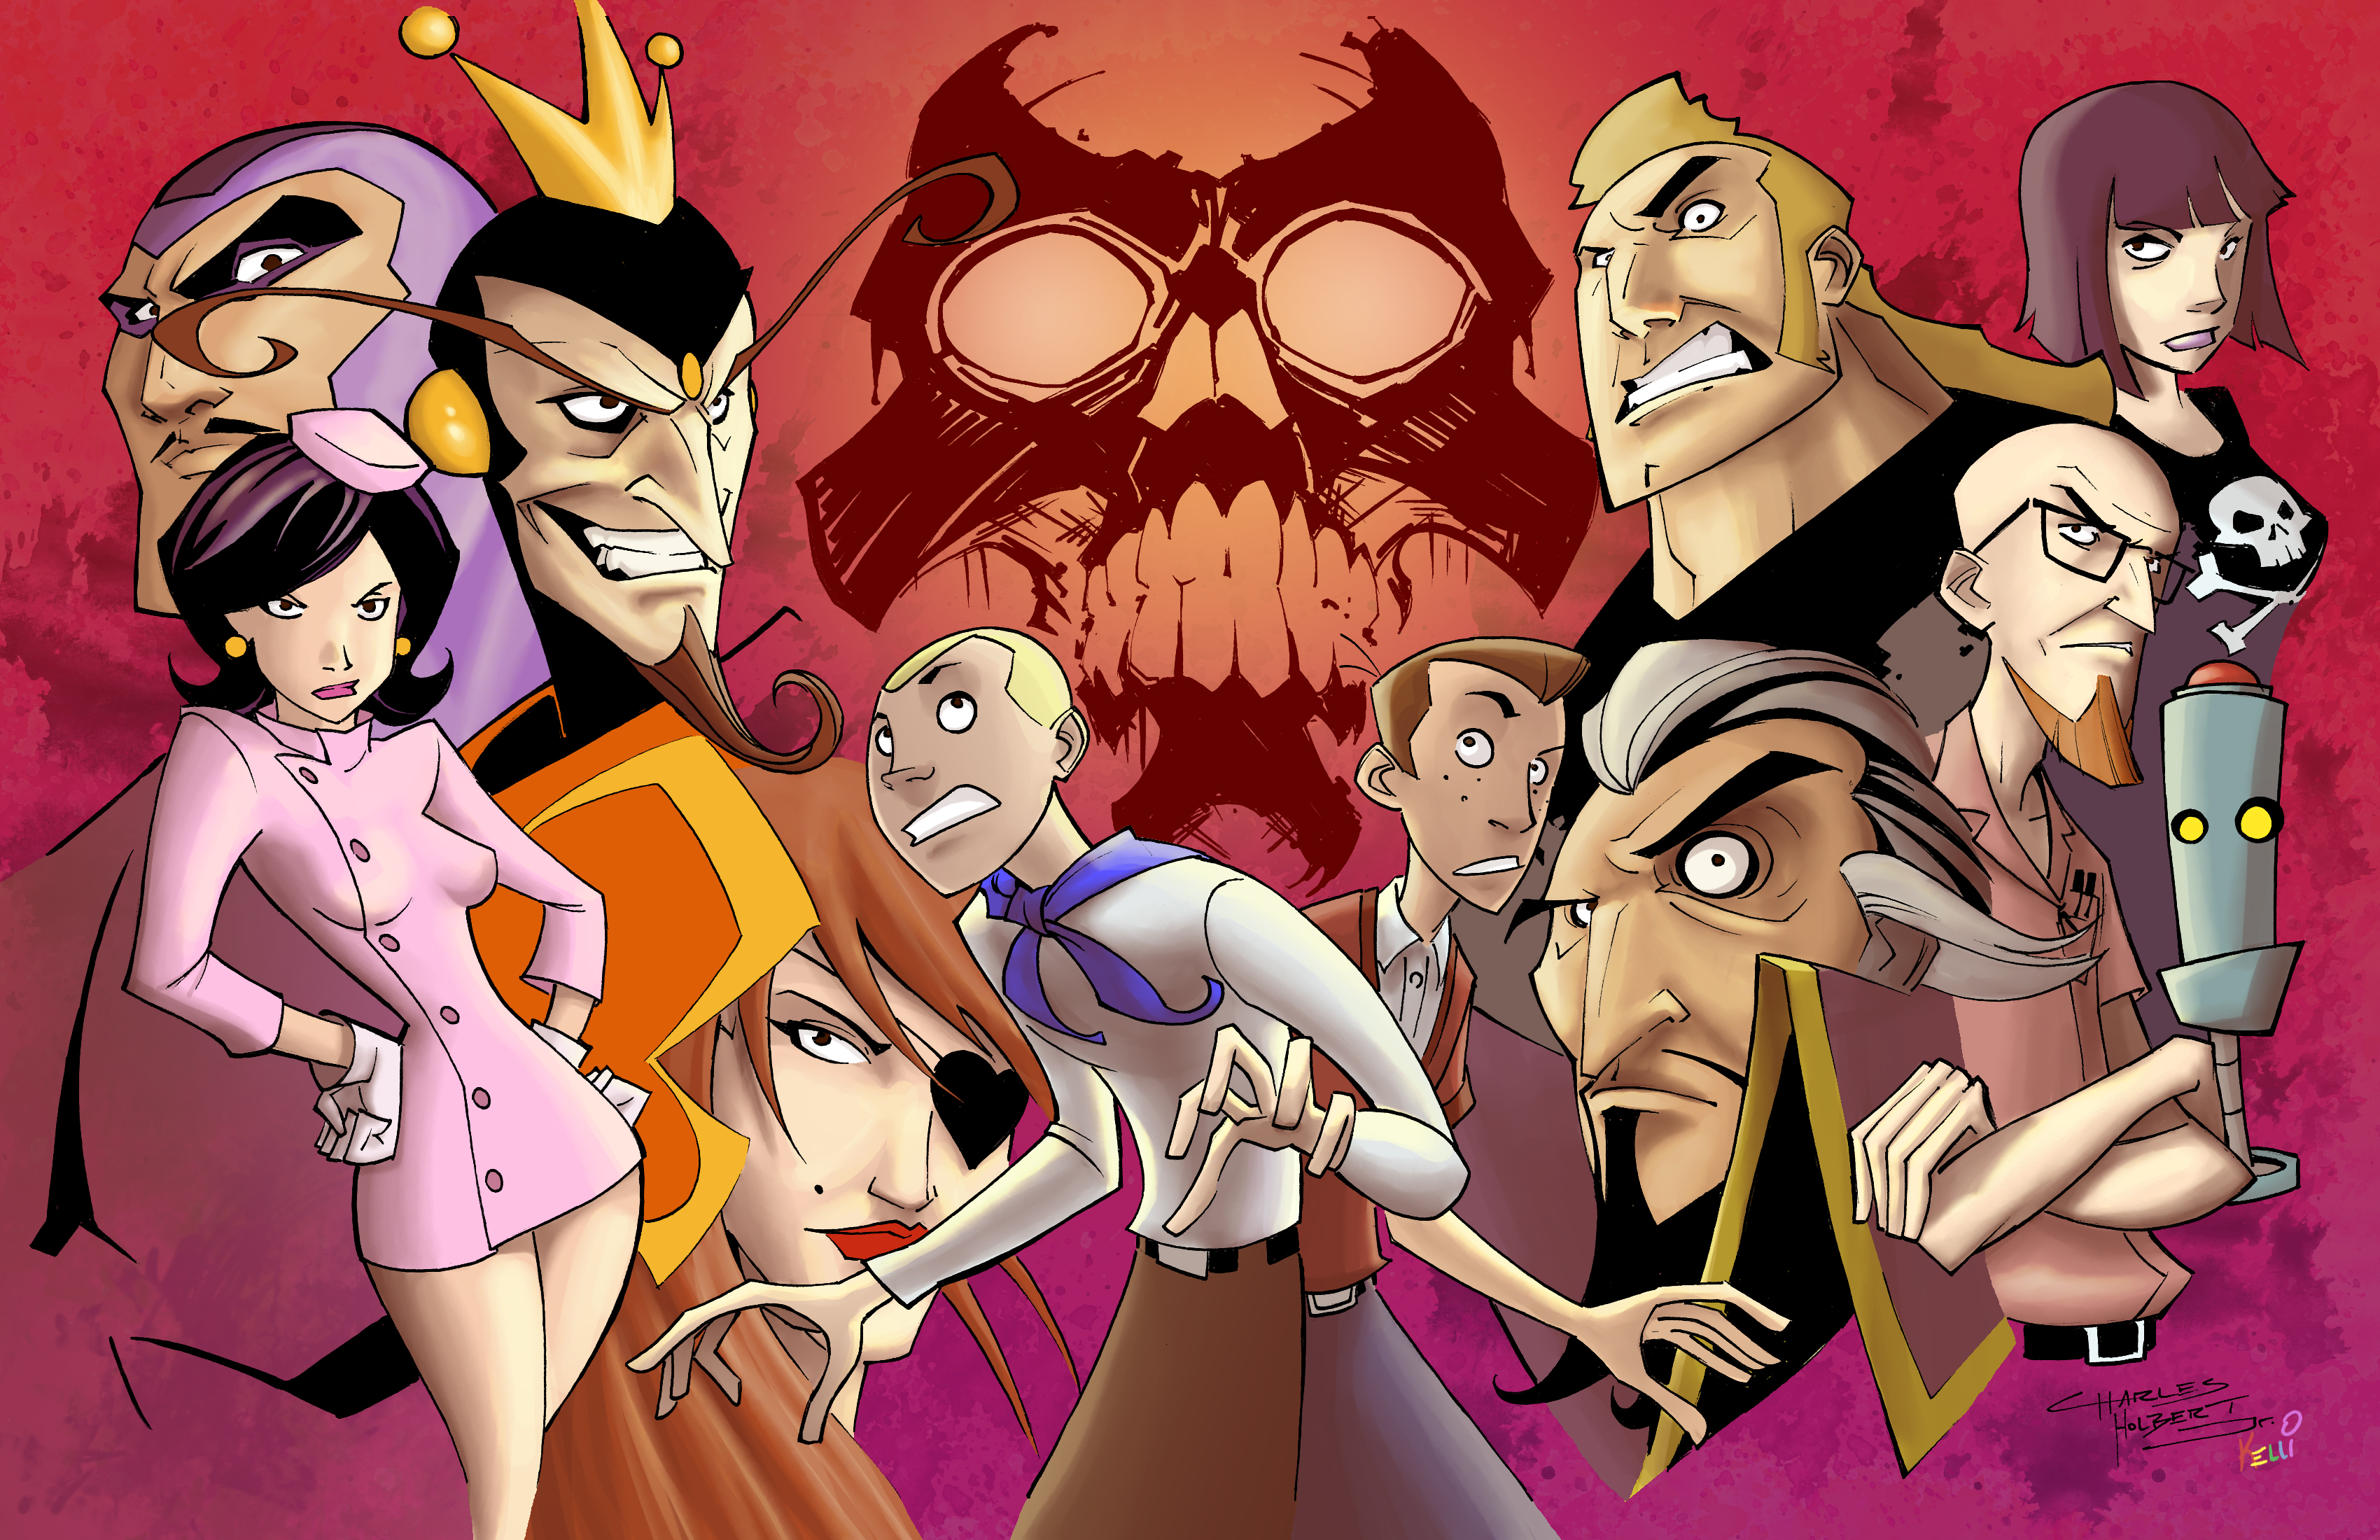 TV Show The Venture Bros. HD Wallpaper | Background Image